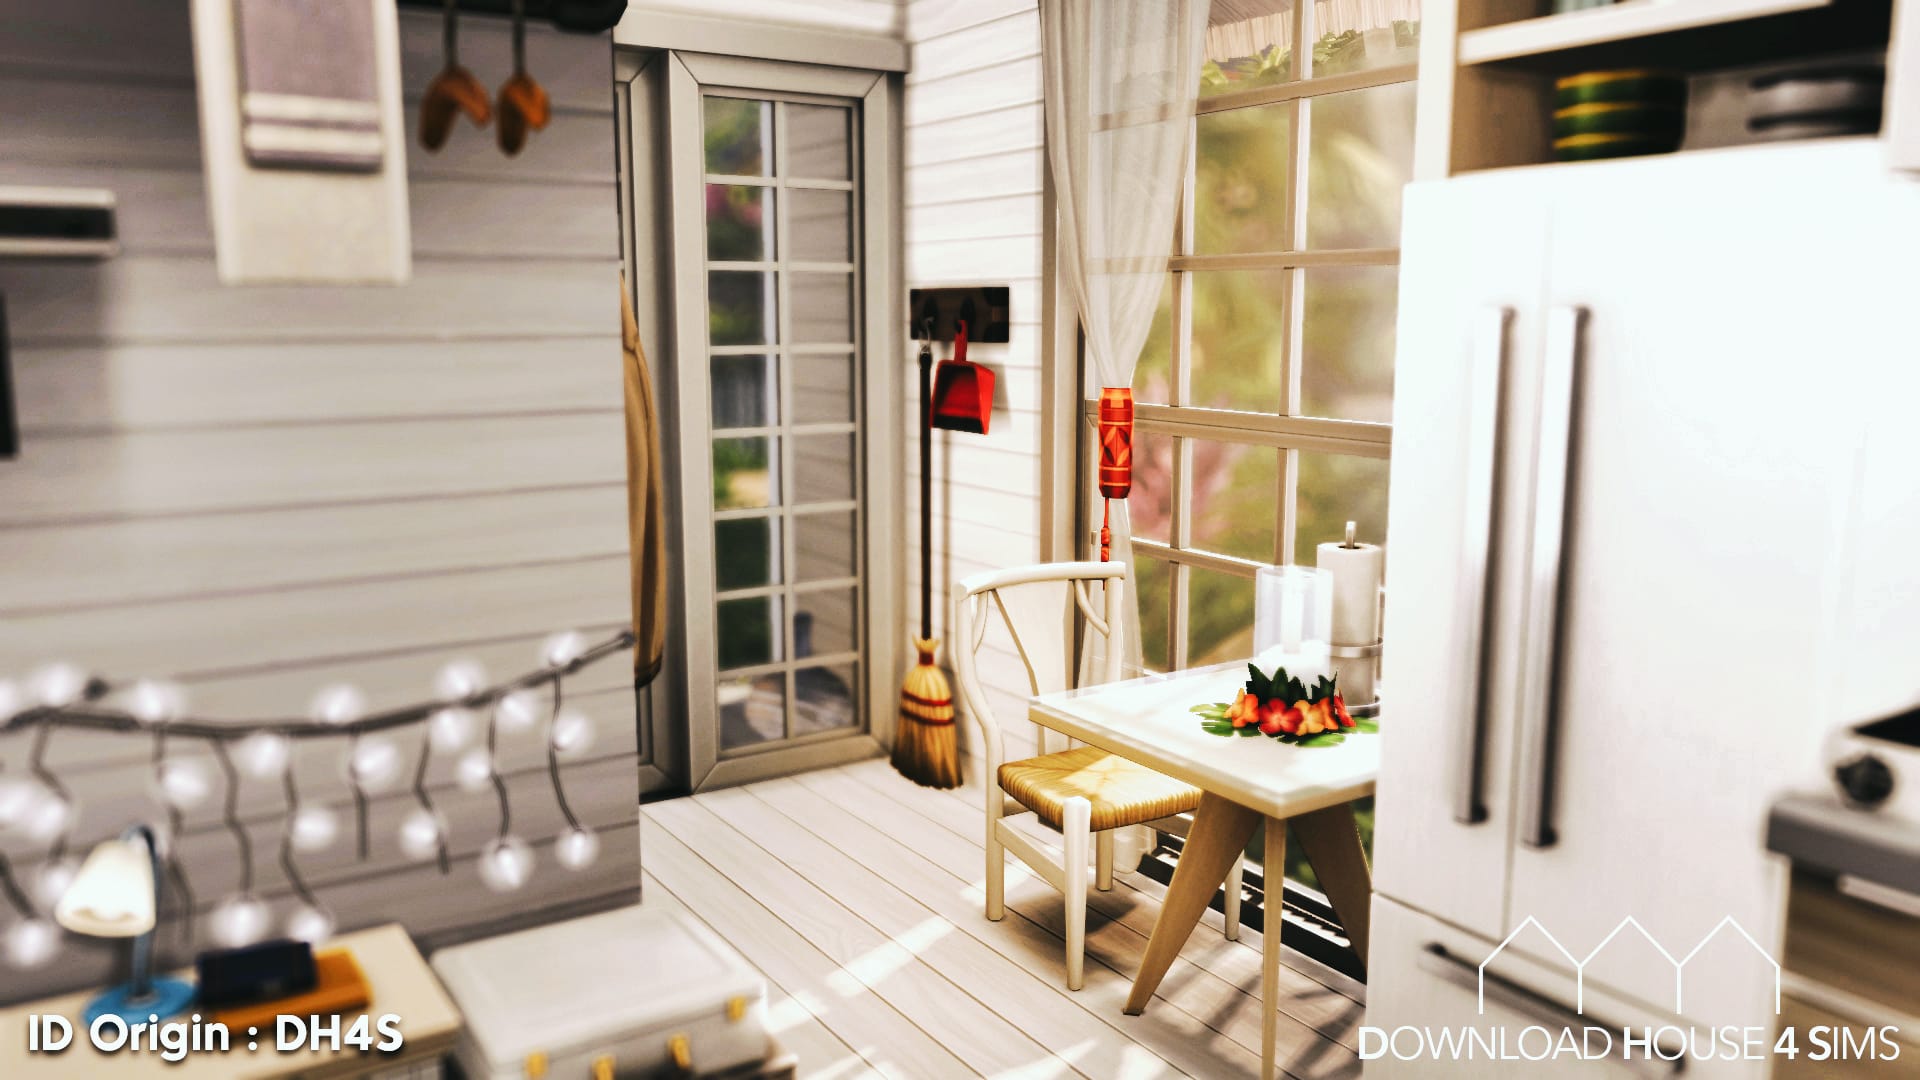 Download-House-4-sims-Tiny-beach-cabin-house-11